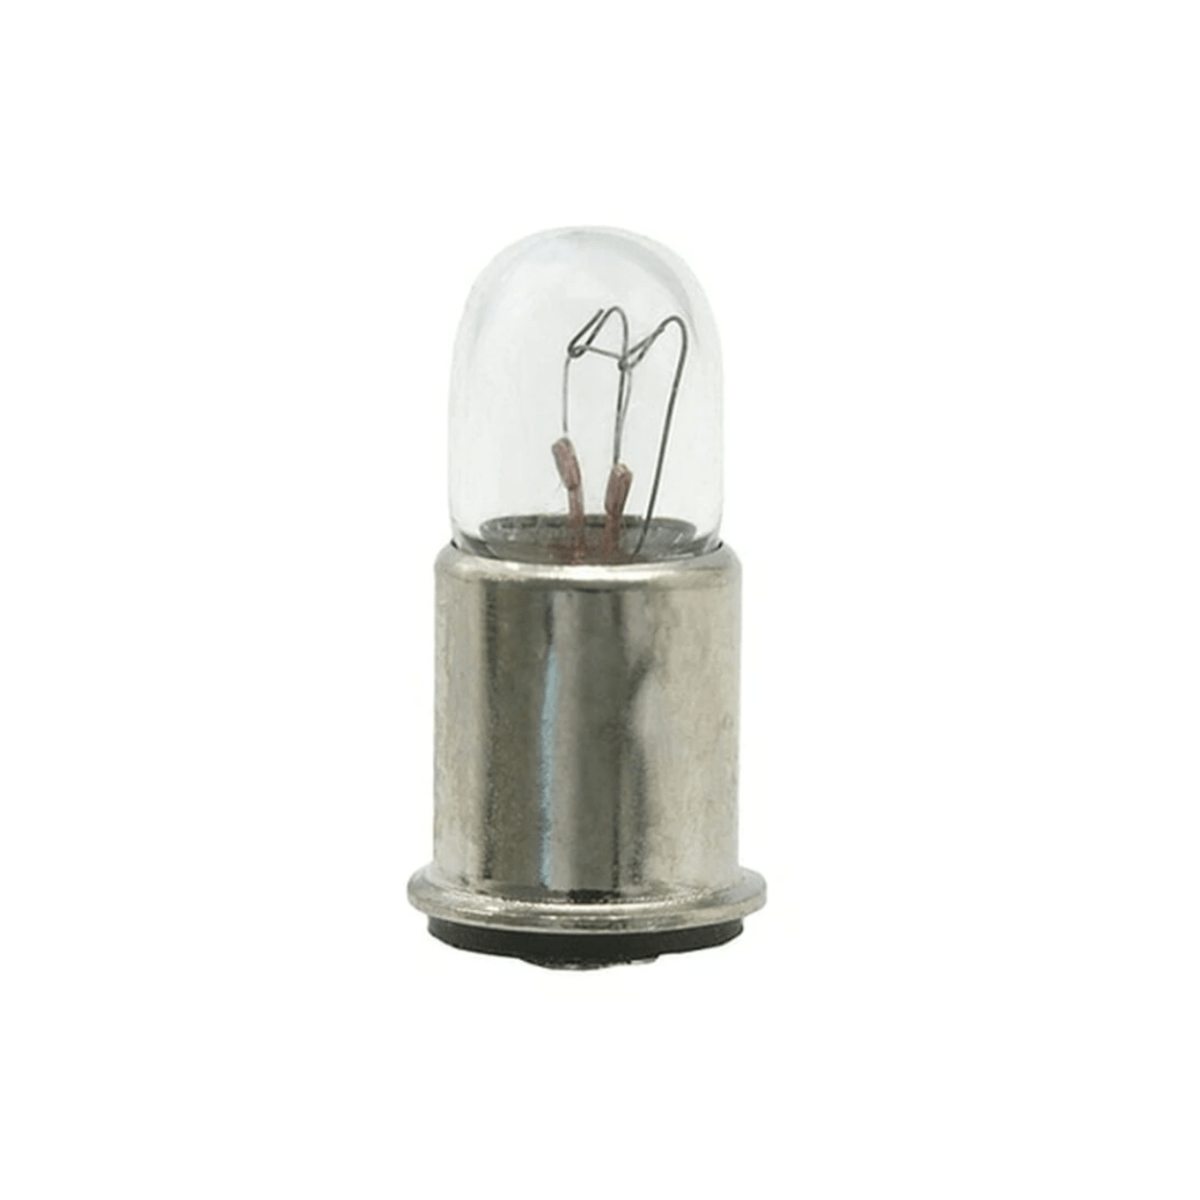 Replacement Bulb for Morley Pedals